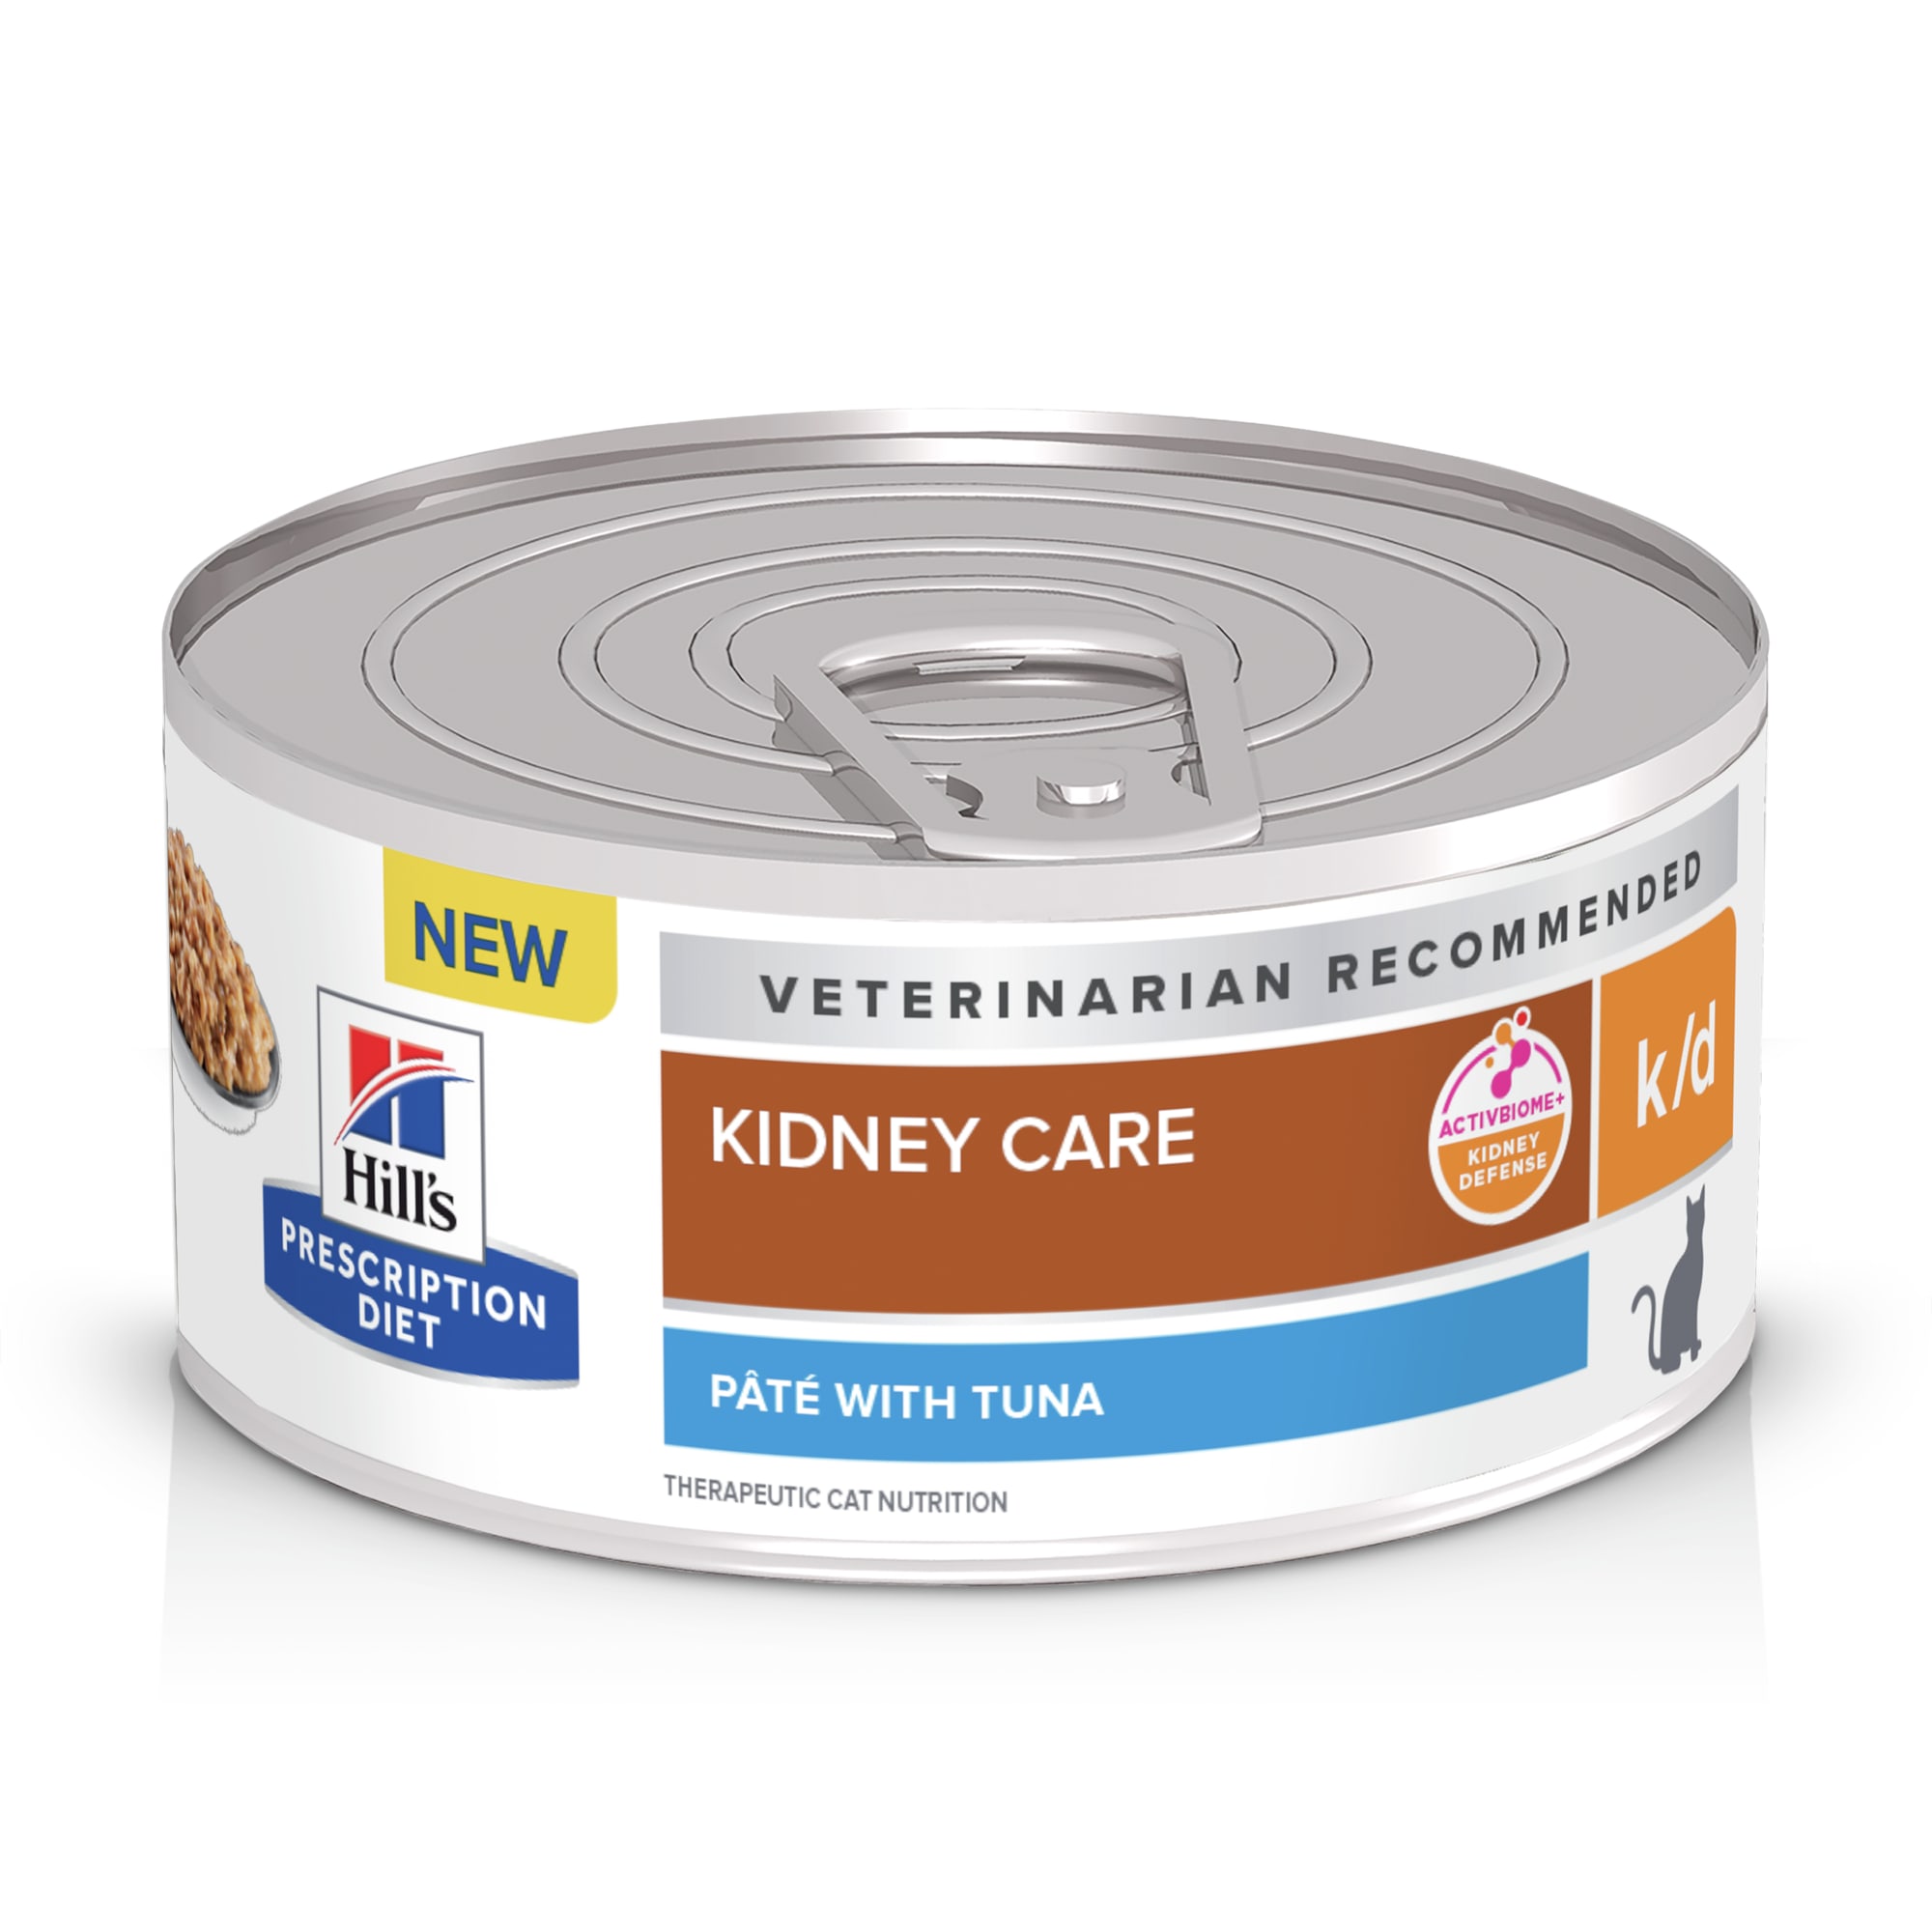 Hill's Prescription Diet k/d Kidney Care with Tuna Canned Cat Food, 5.5